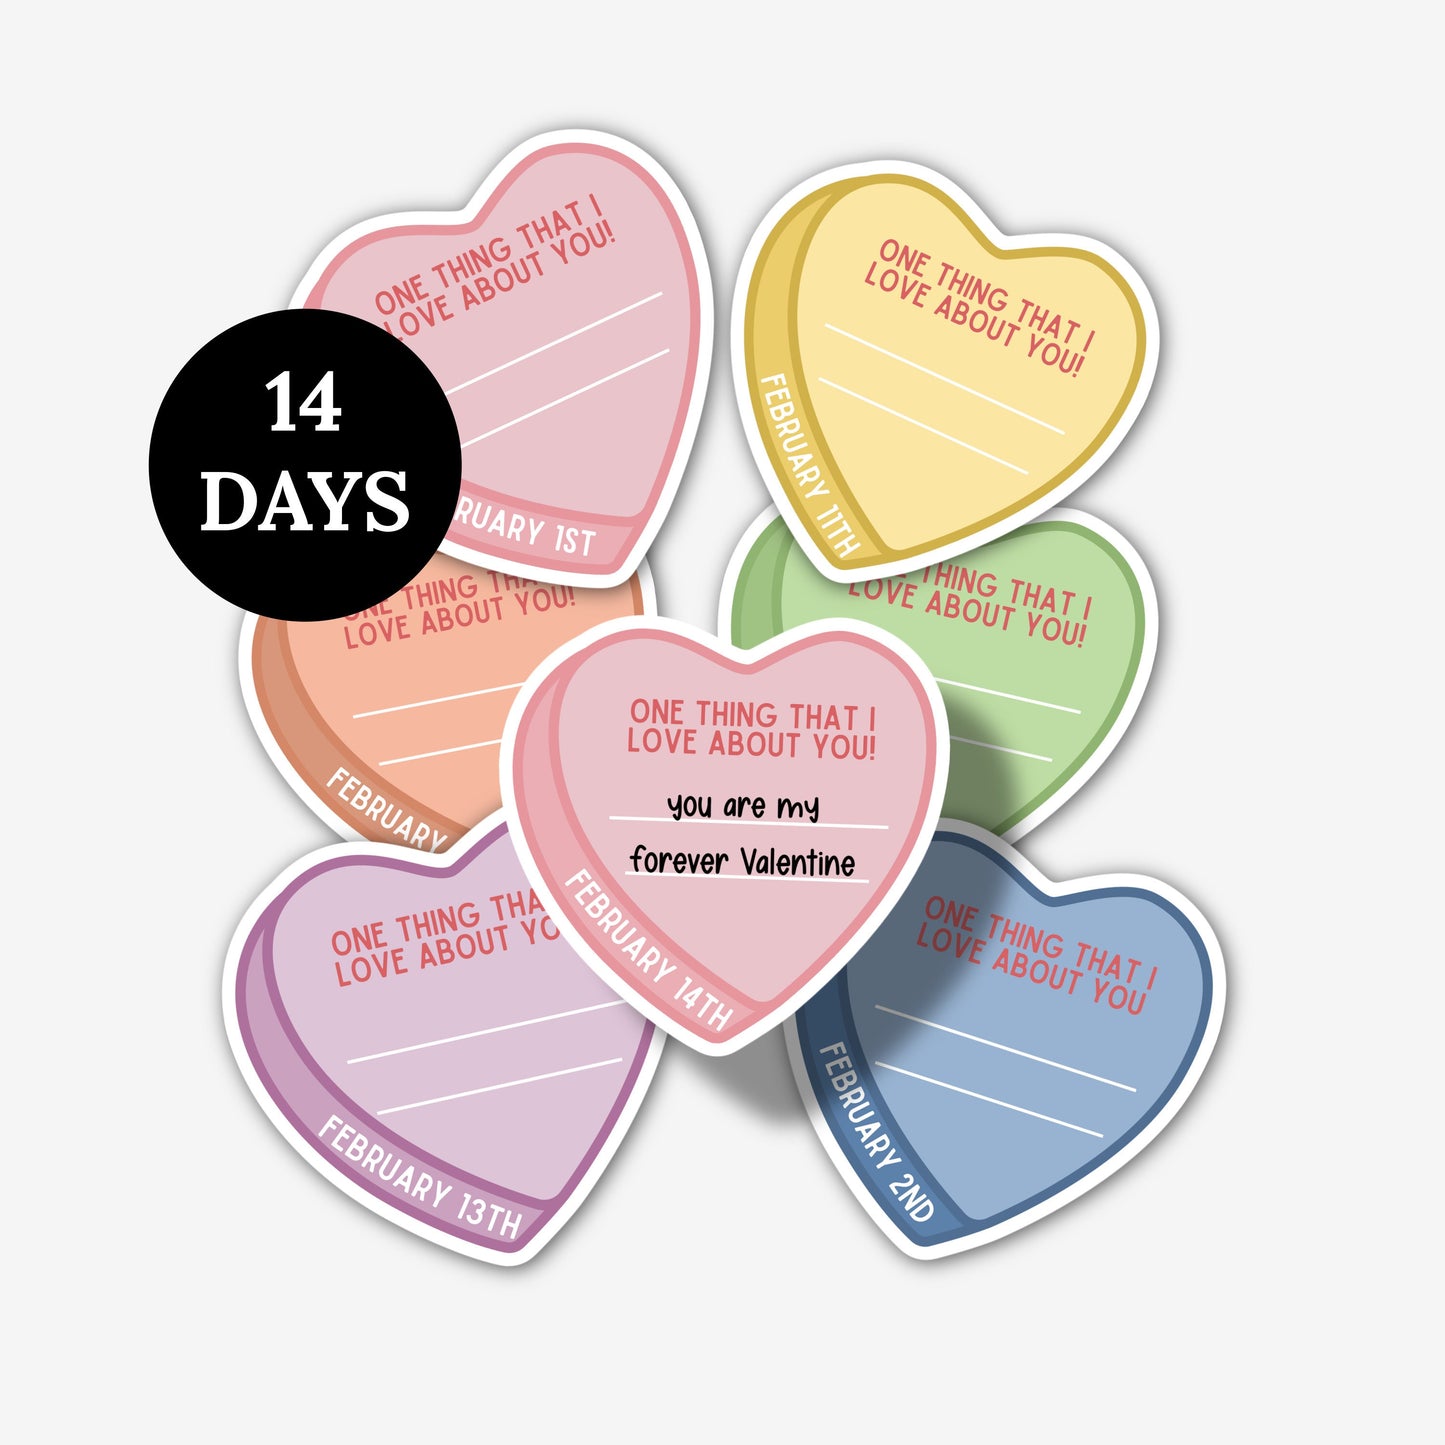 14 Reasons Why I Love You | Countdown to Valentine's Day Printable Hearts Notes with Dates | Special Gift for Kids Family Friends & Couples